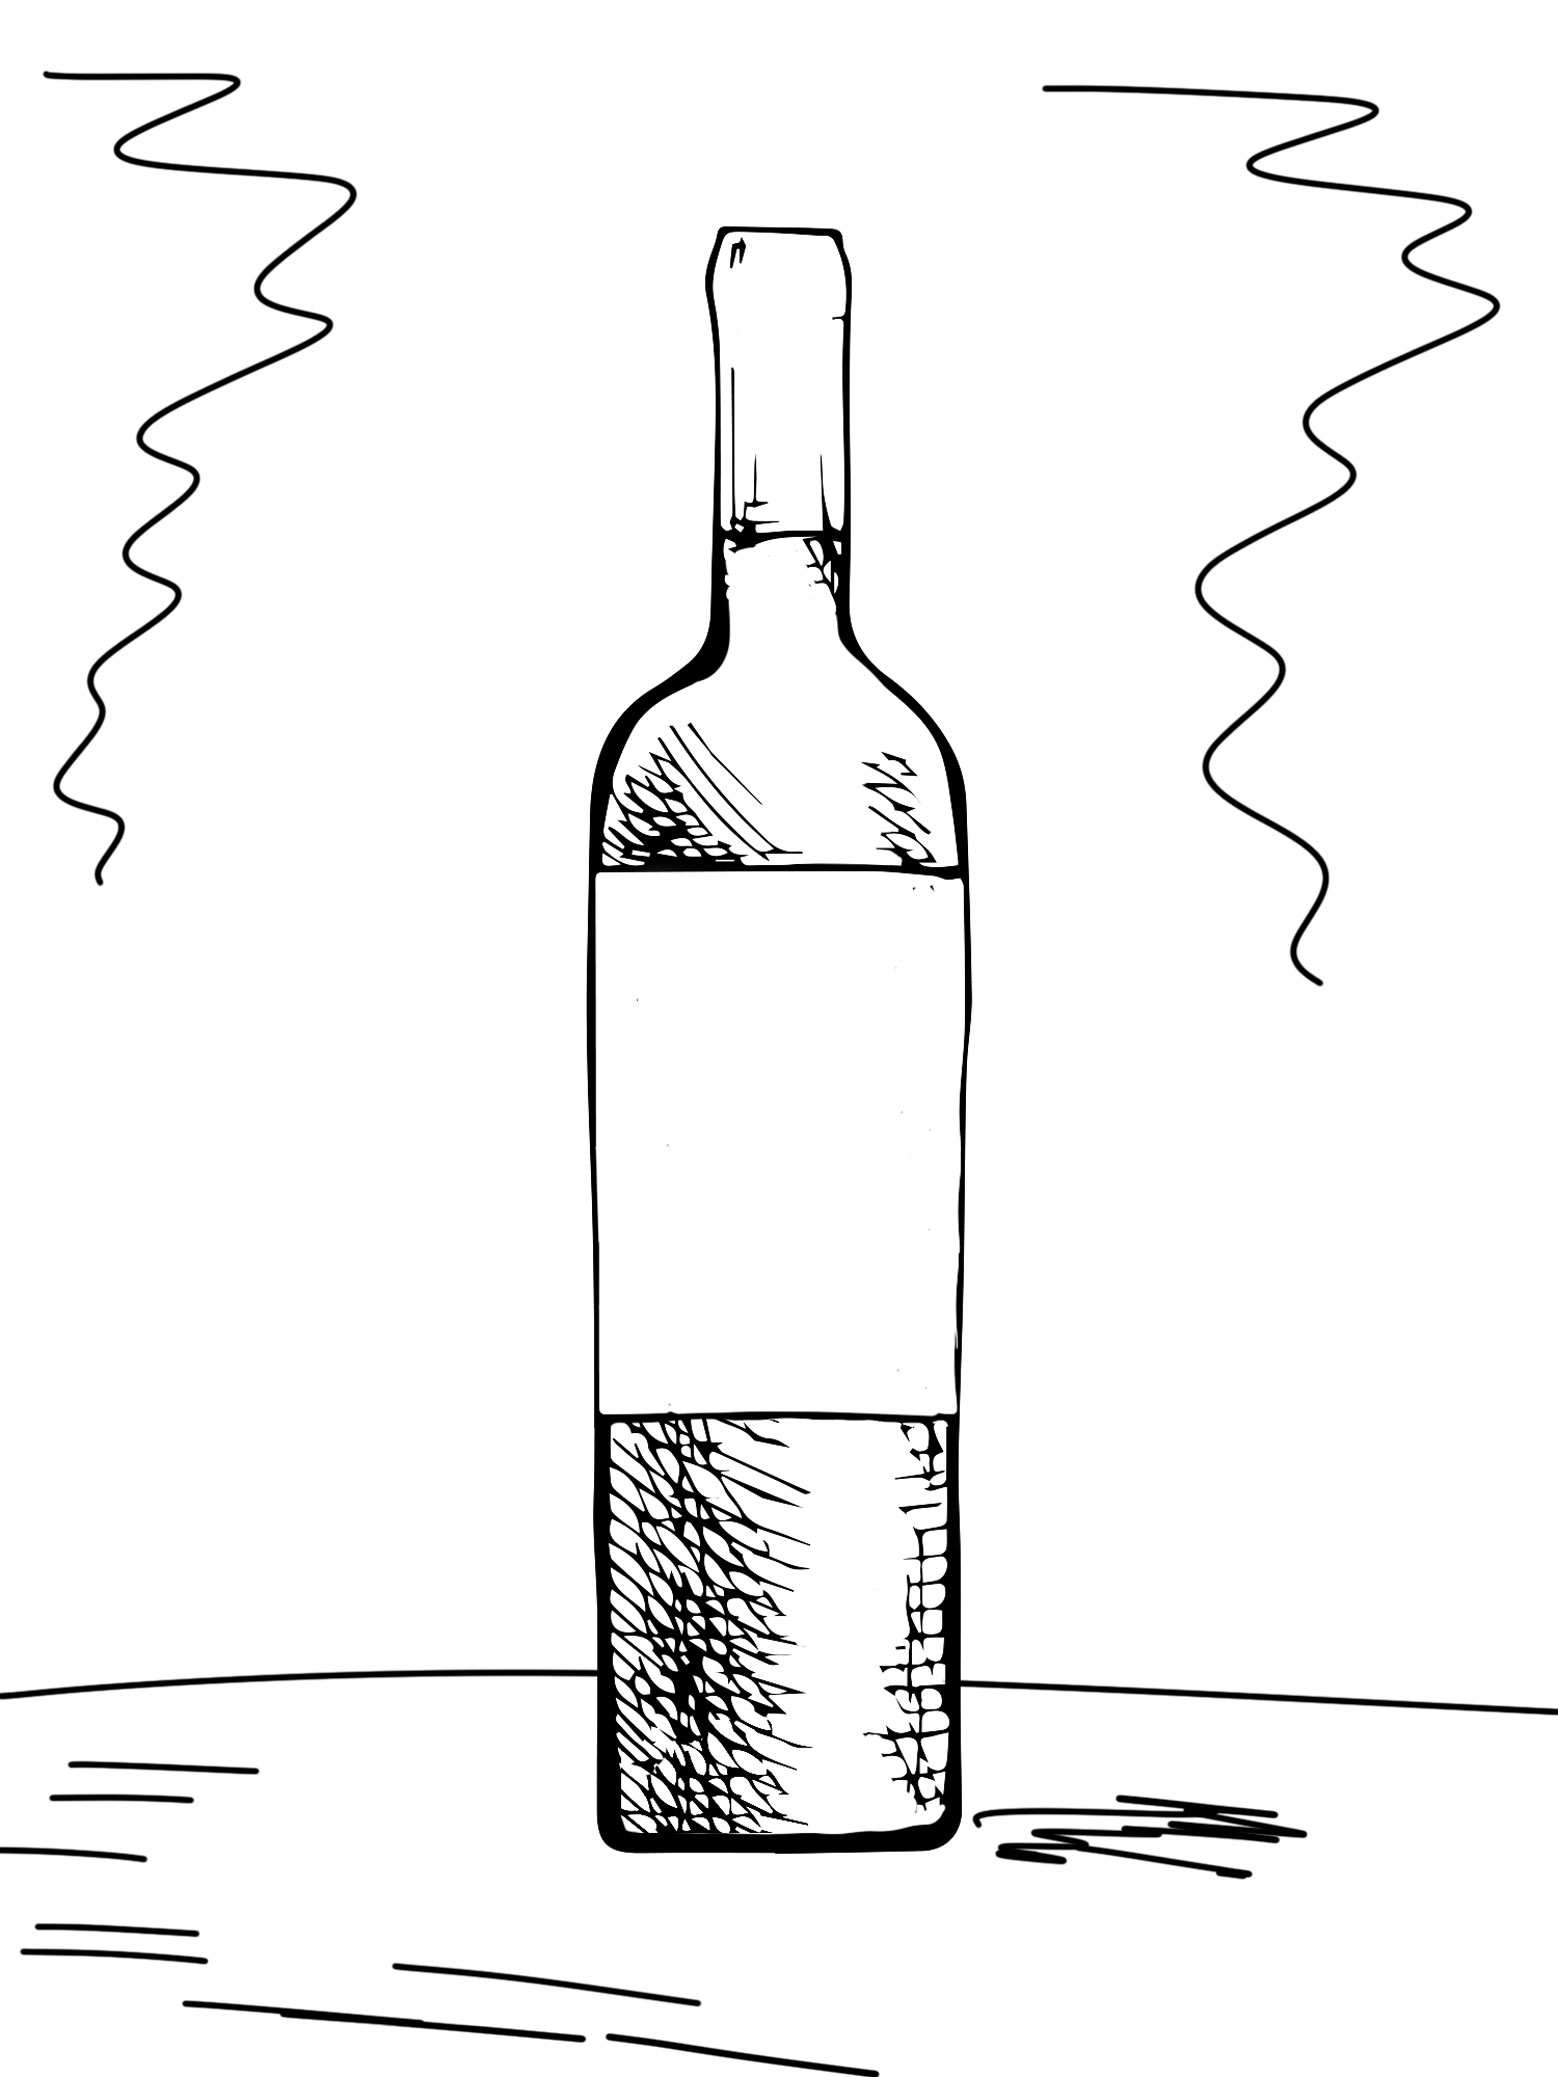 Wine bottle sketch for photography brief